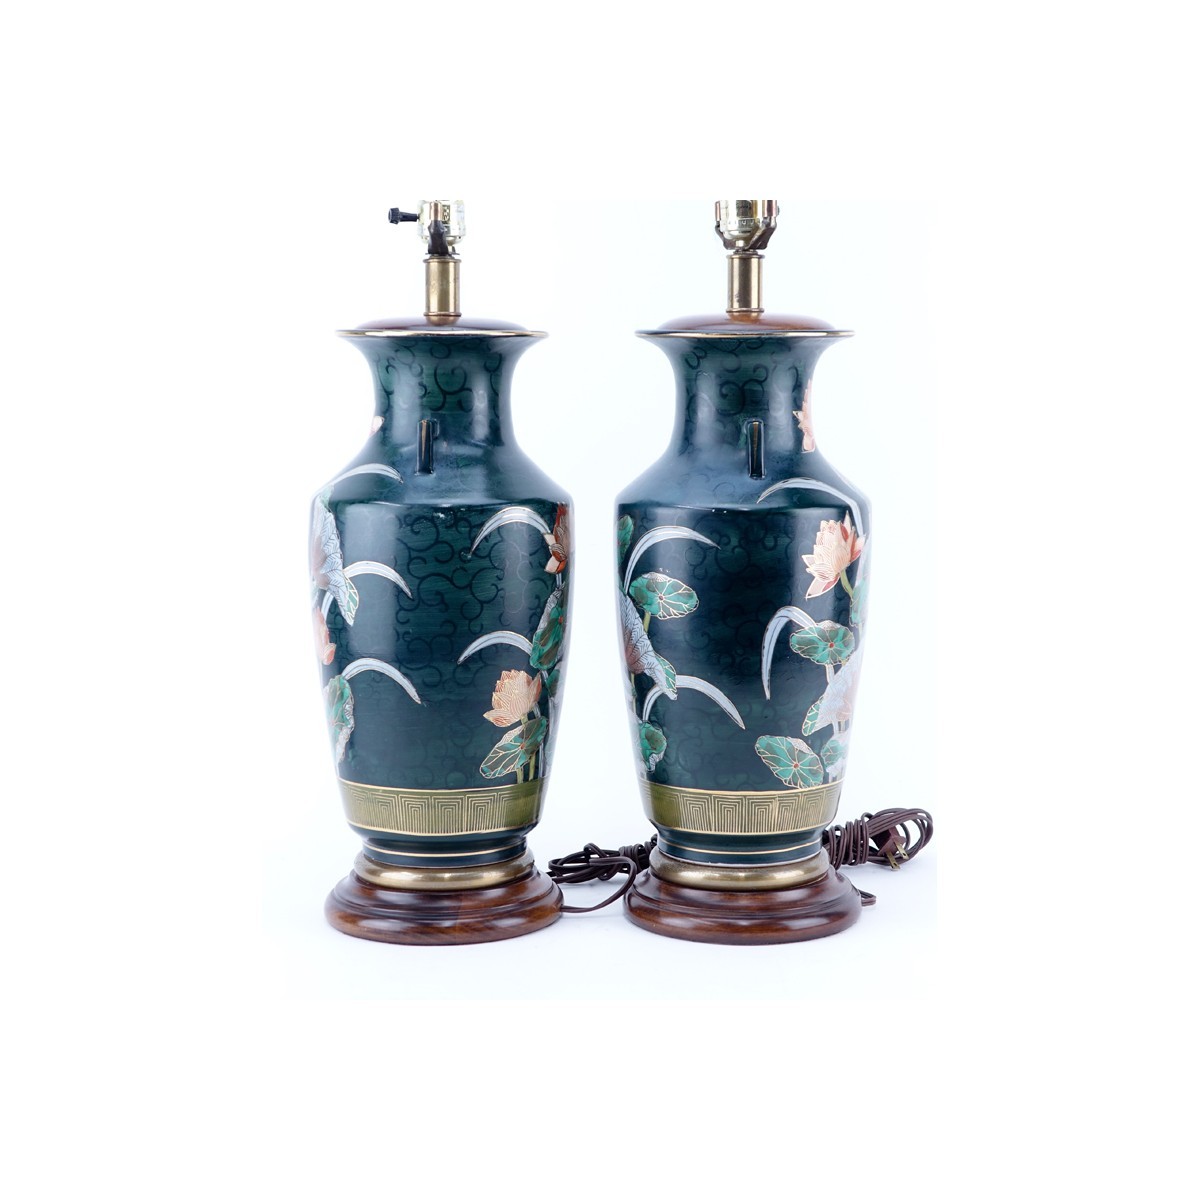 Pair of Japanese Nippon Vases as Lamps. Good condi